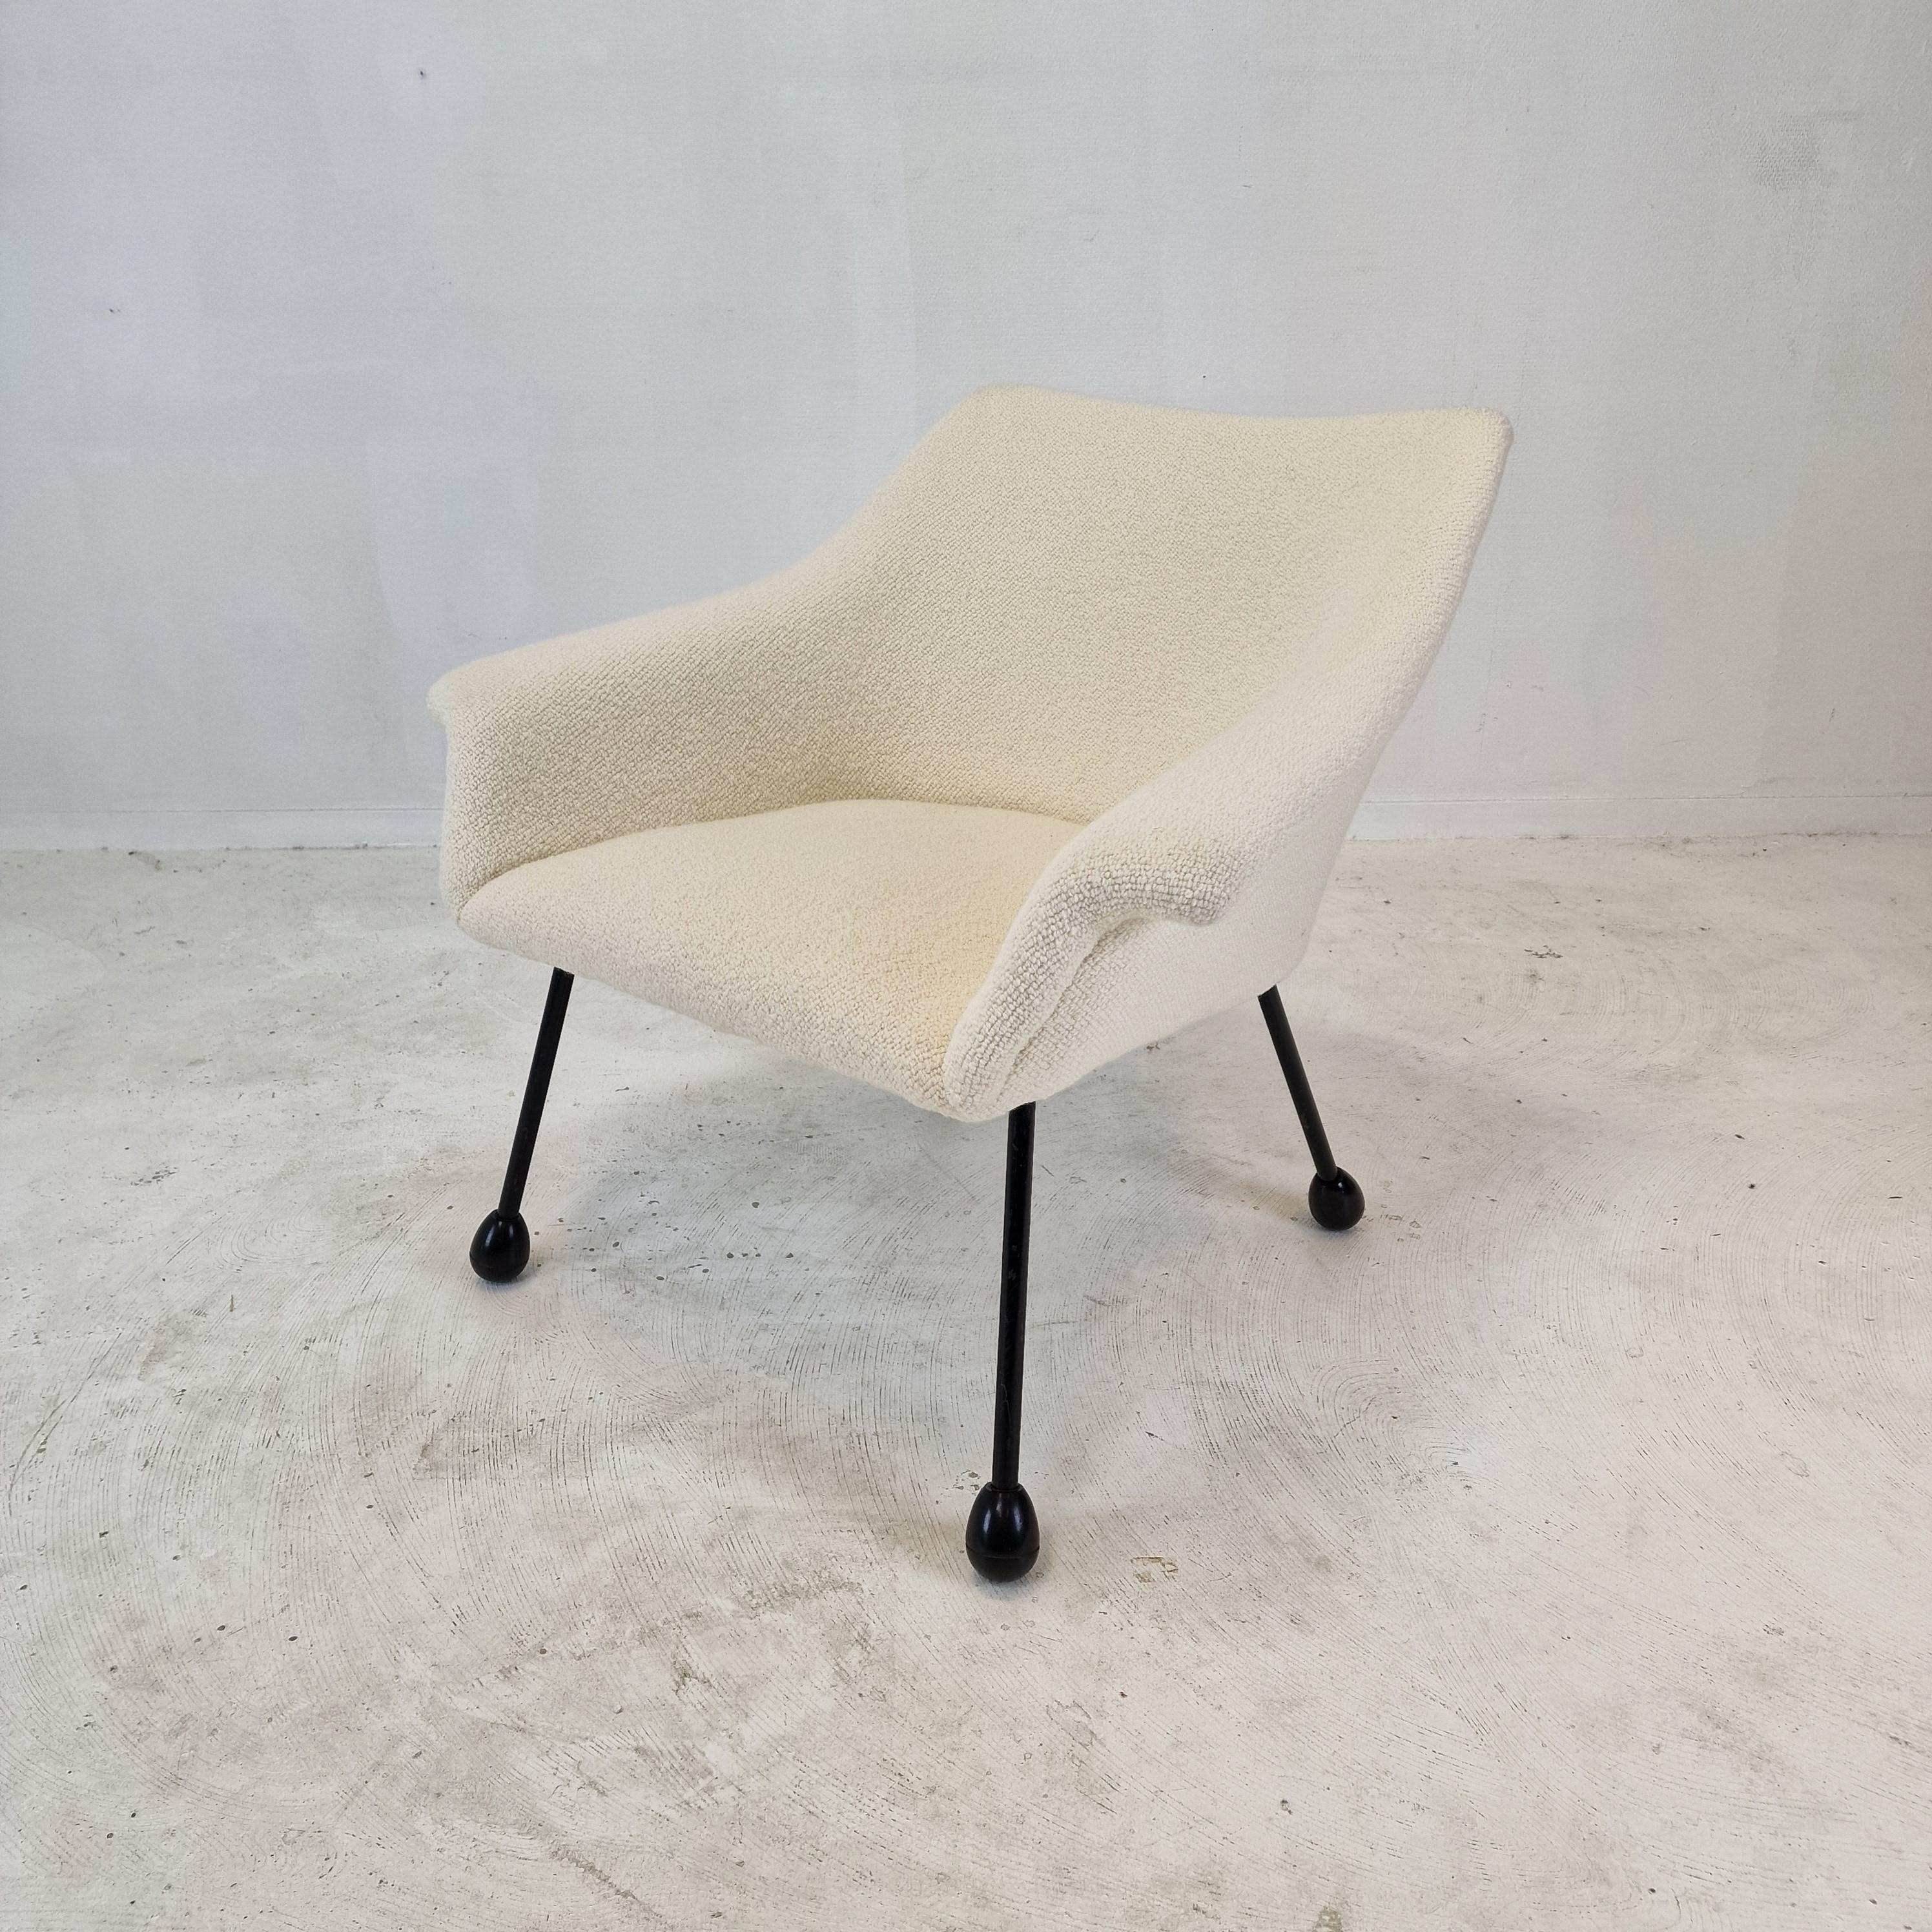 Comfortable and cosy armchair, fabricated in Italy in the 60’s. 

This lovely chair is covered with cute and high quality wool fabric, Pierre Frey Judith.

The chair is completely restored with new fabric and new foam, it is in perfect